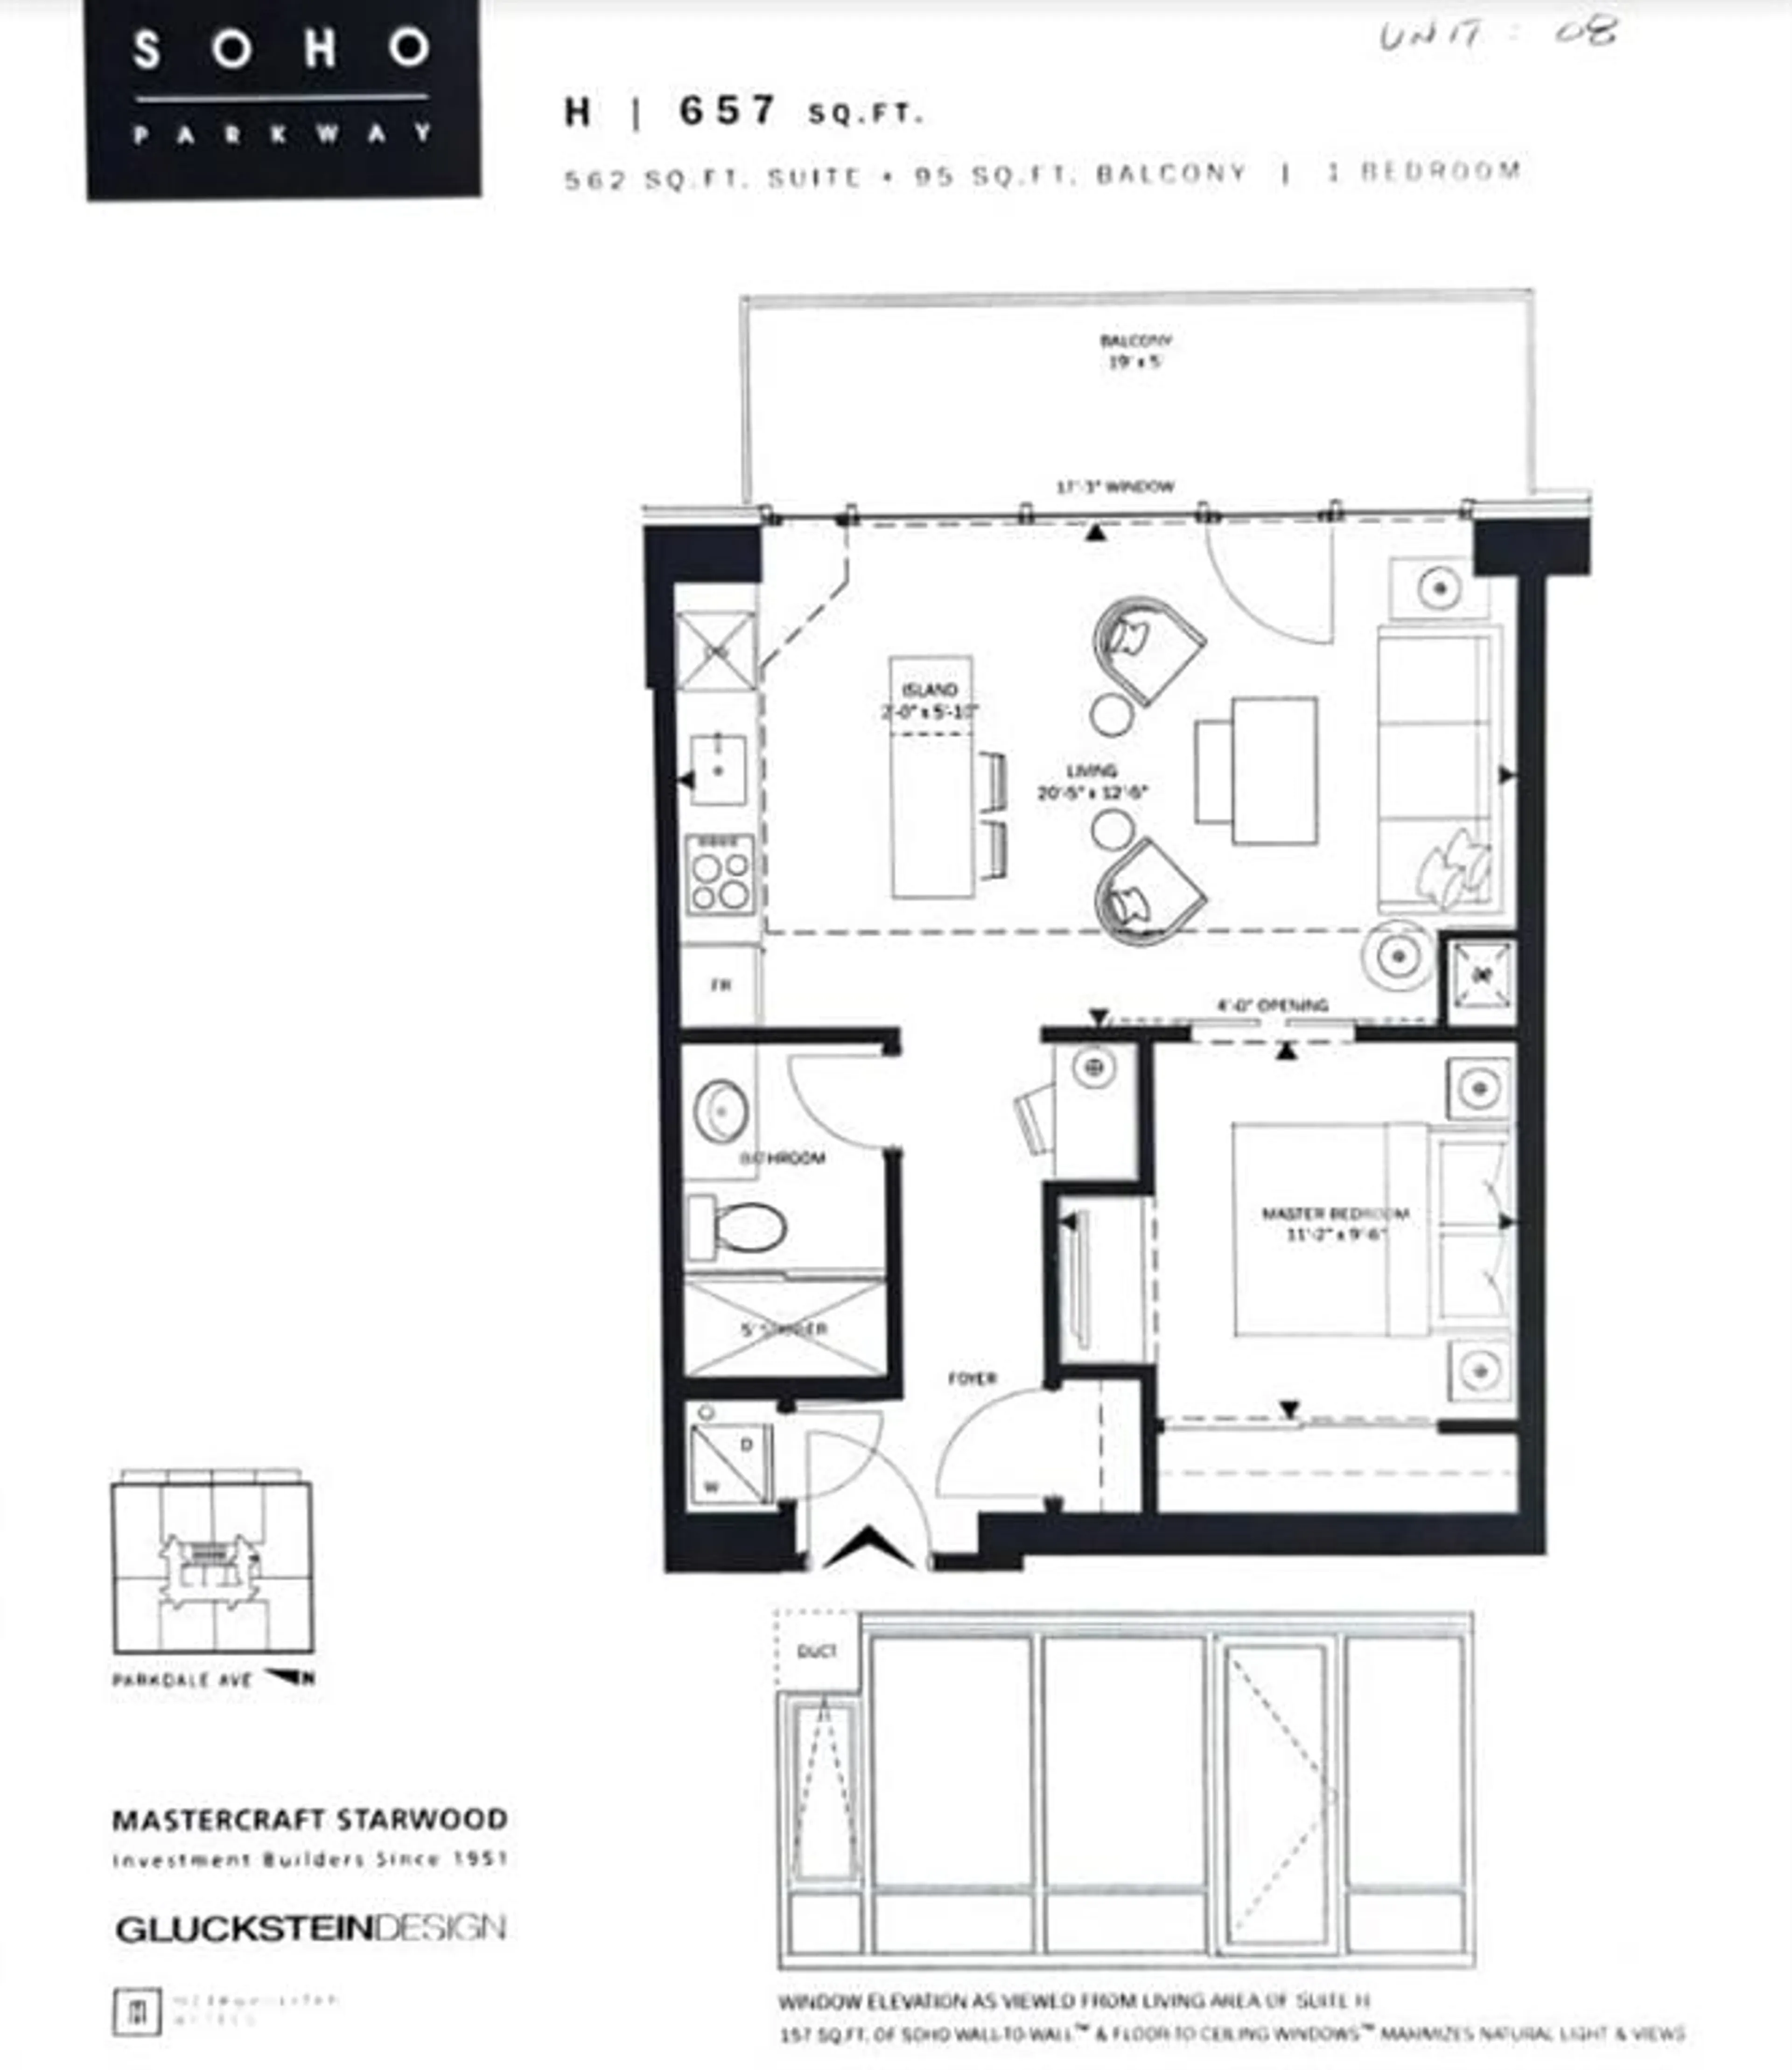 Floor plan for 201 PARKDALE Ave #1408, Ottawa Ontario K1Y 1E8